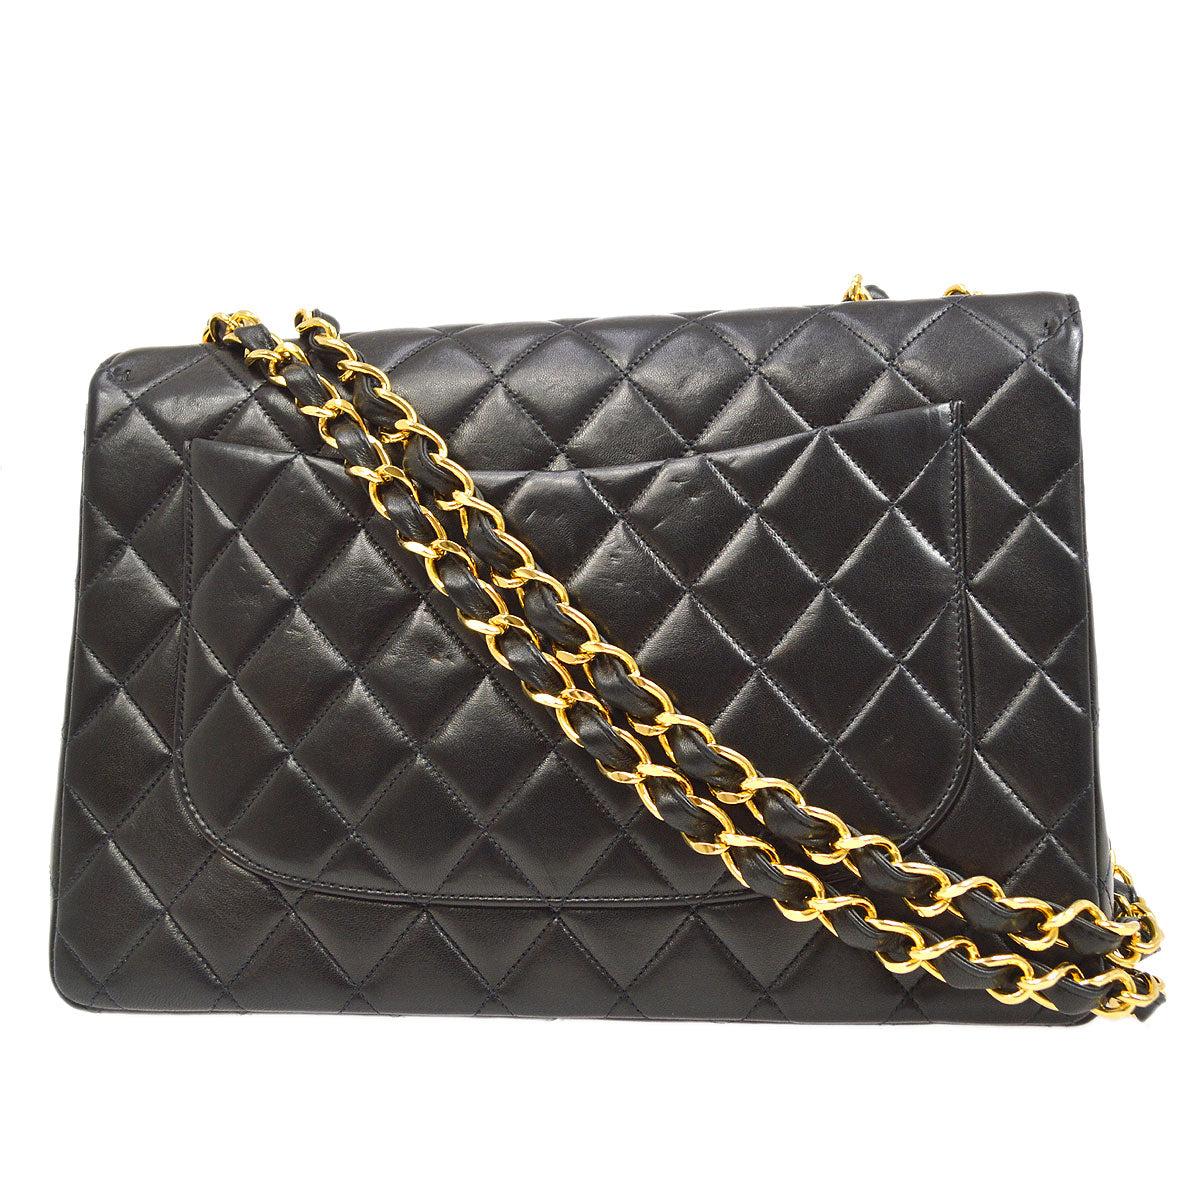 CHANEL Black Lambskin Leather Large Gold CC Jumbo Shoulder Flap Bag In Good Condition For Sale In Chicago, IL